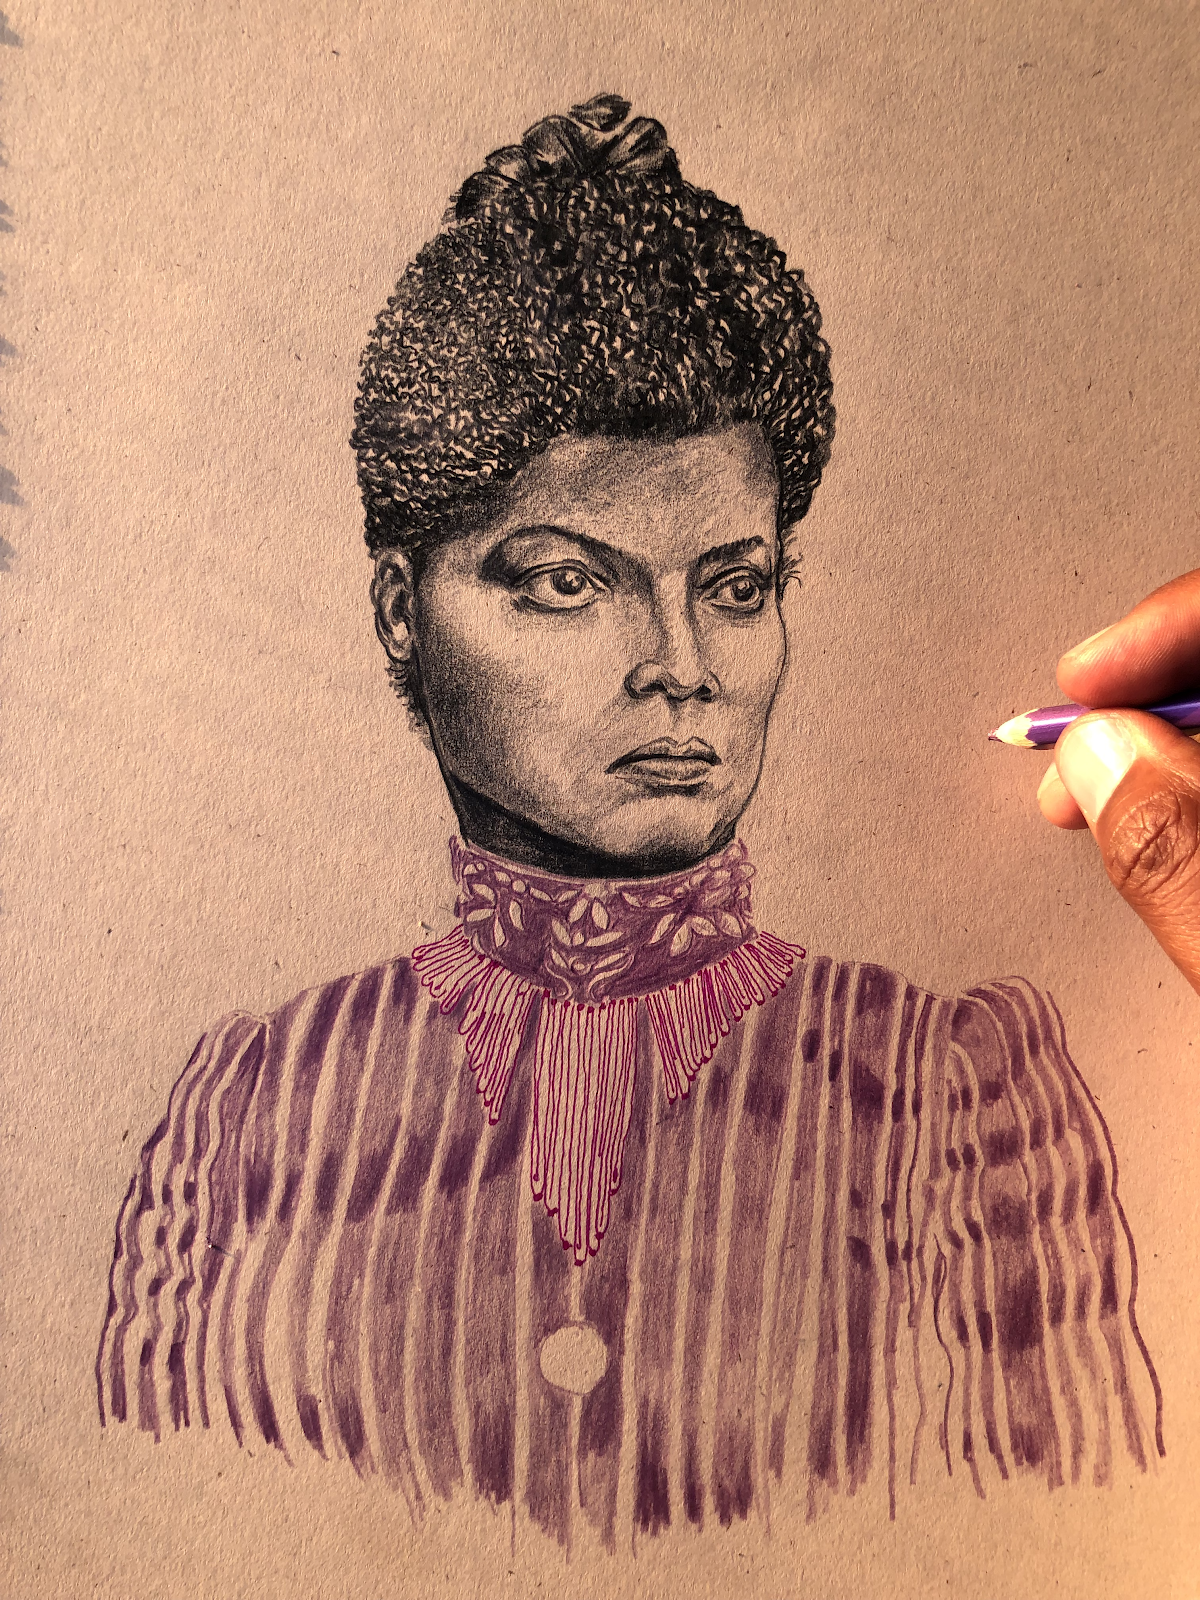 McCalman's hand at work a portrait of civil rights icon and NAACP cofounder Ida B. Wells.